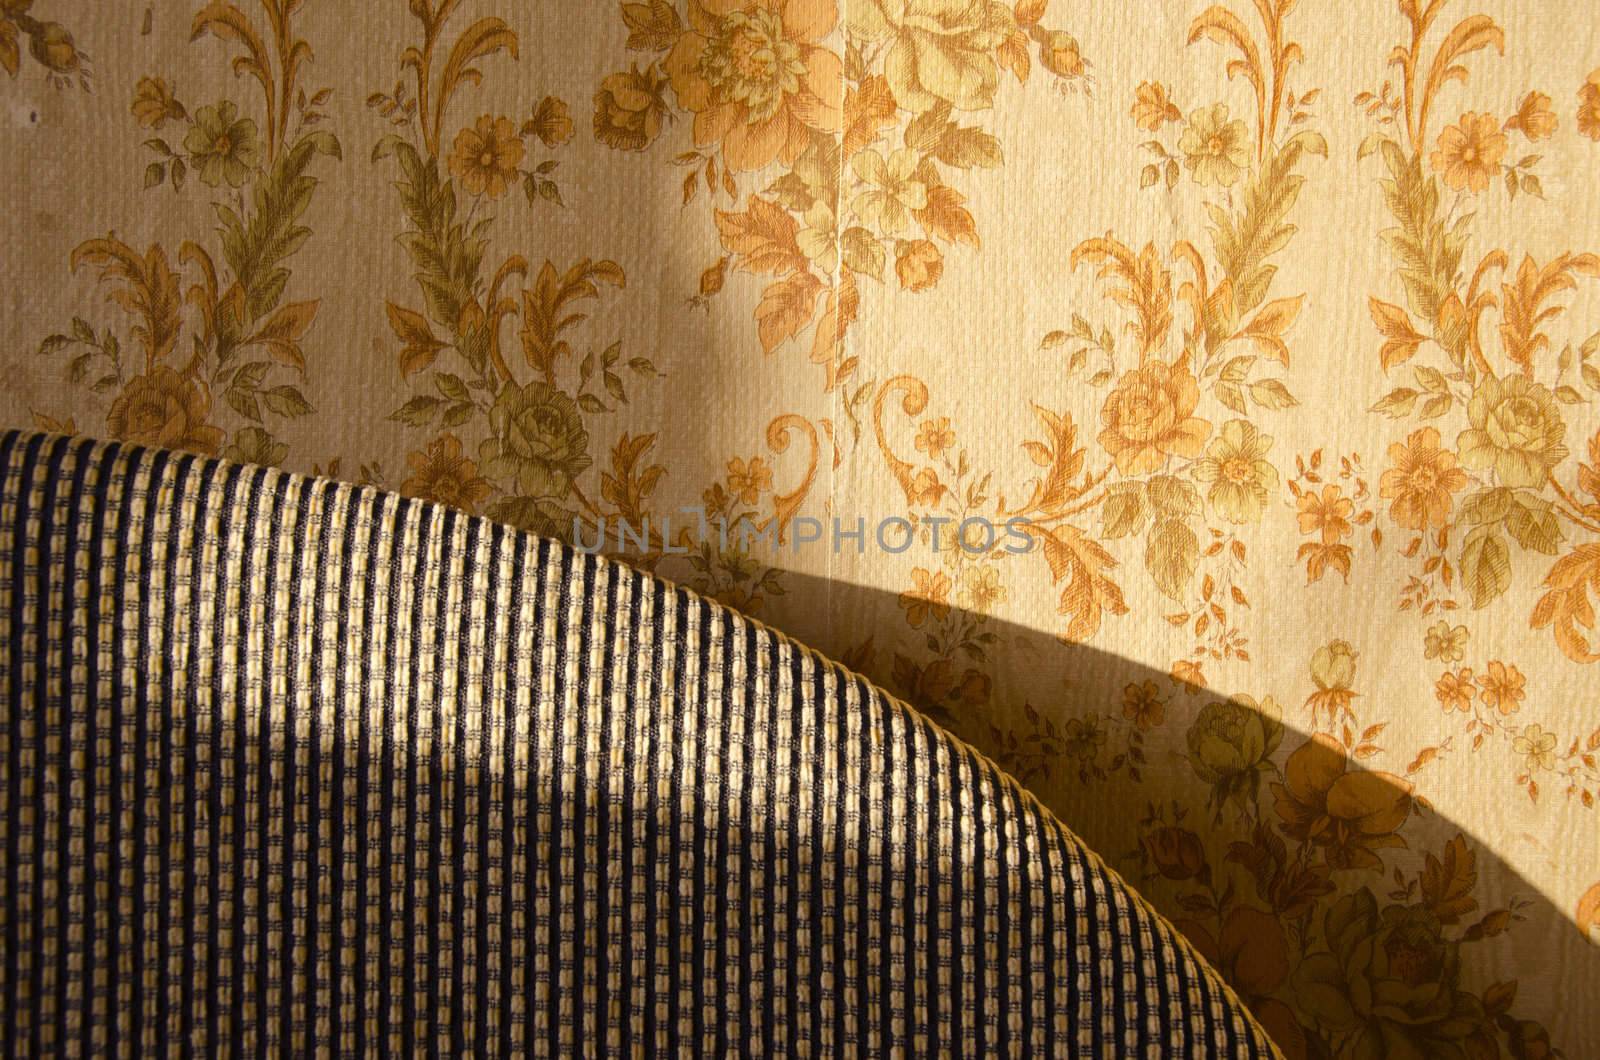 Old home interior design. Part of bed and wall with wallpaper background.